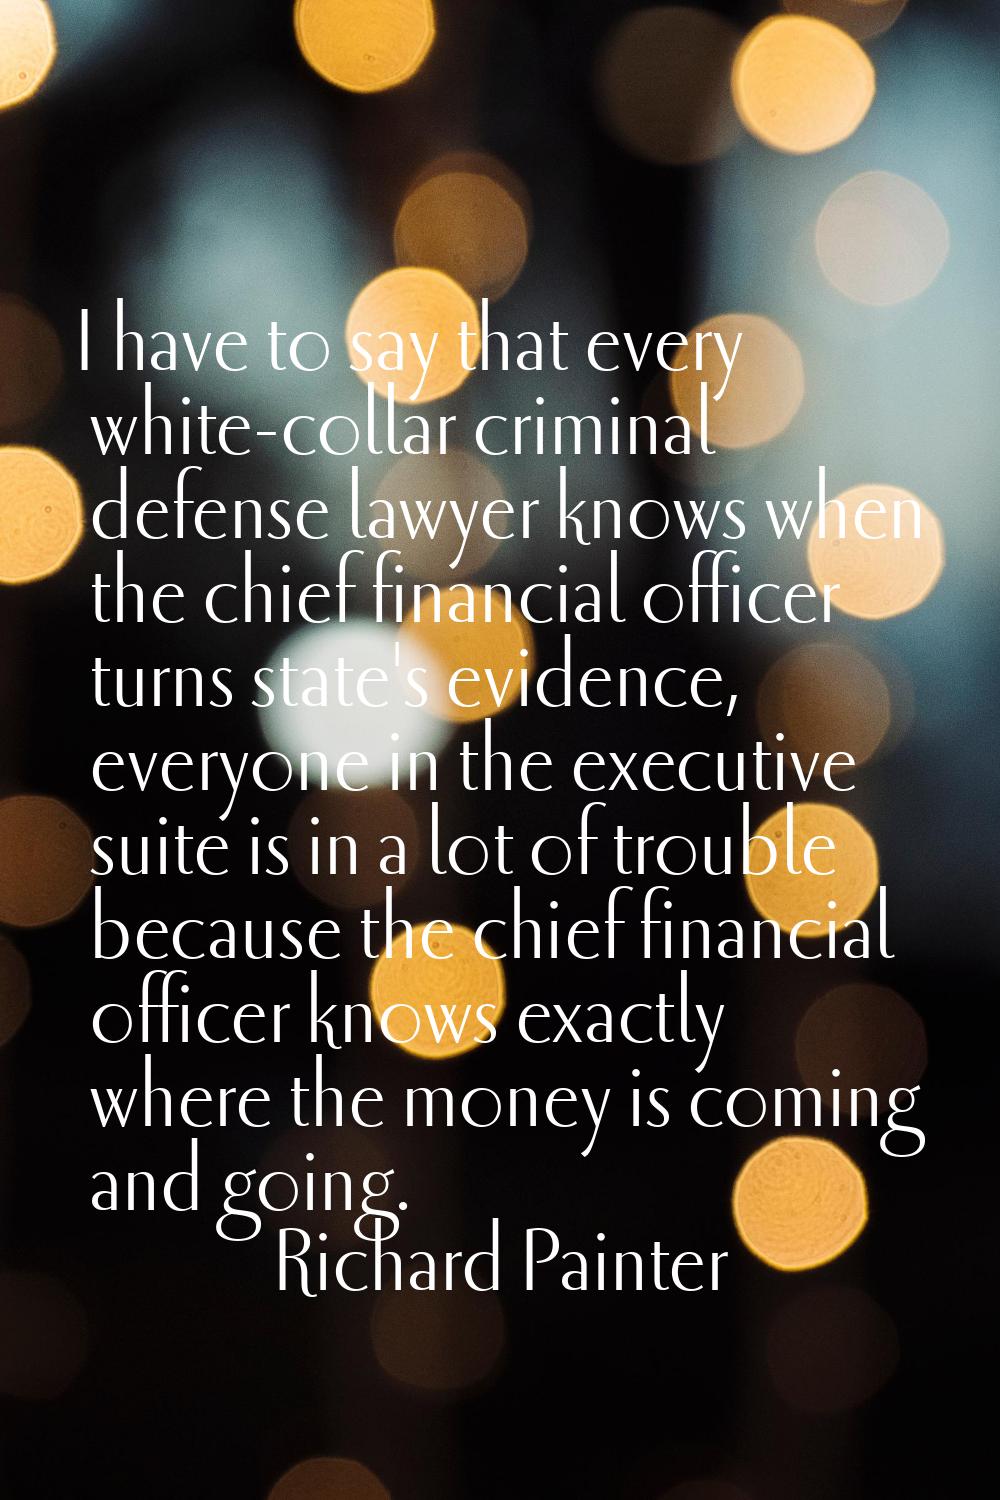 I have to say that every white-collar criminal defense lawyer knows when the chief financial office